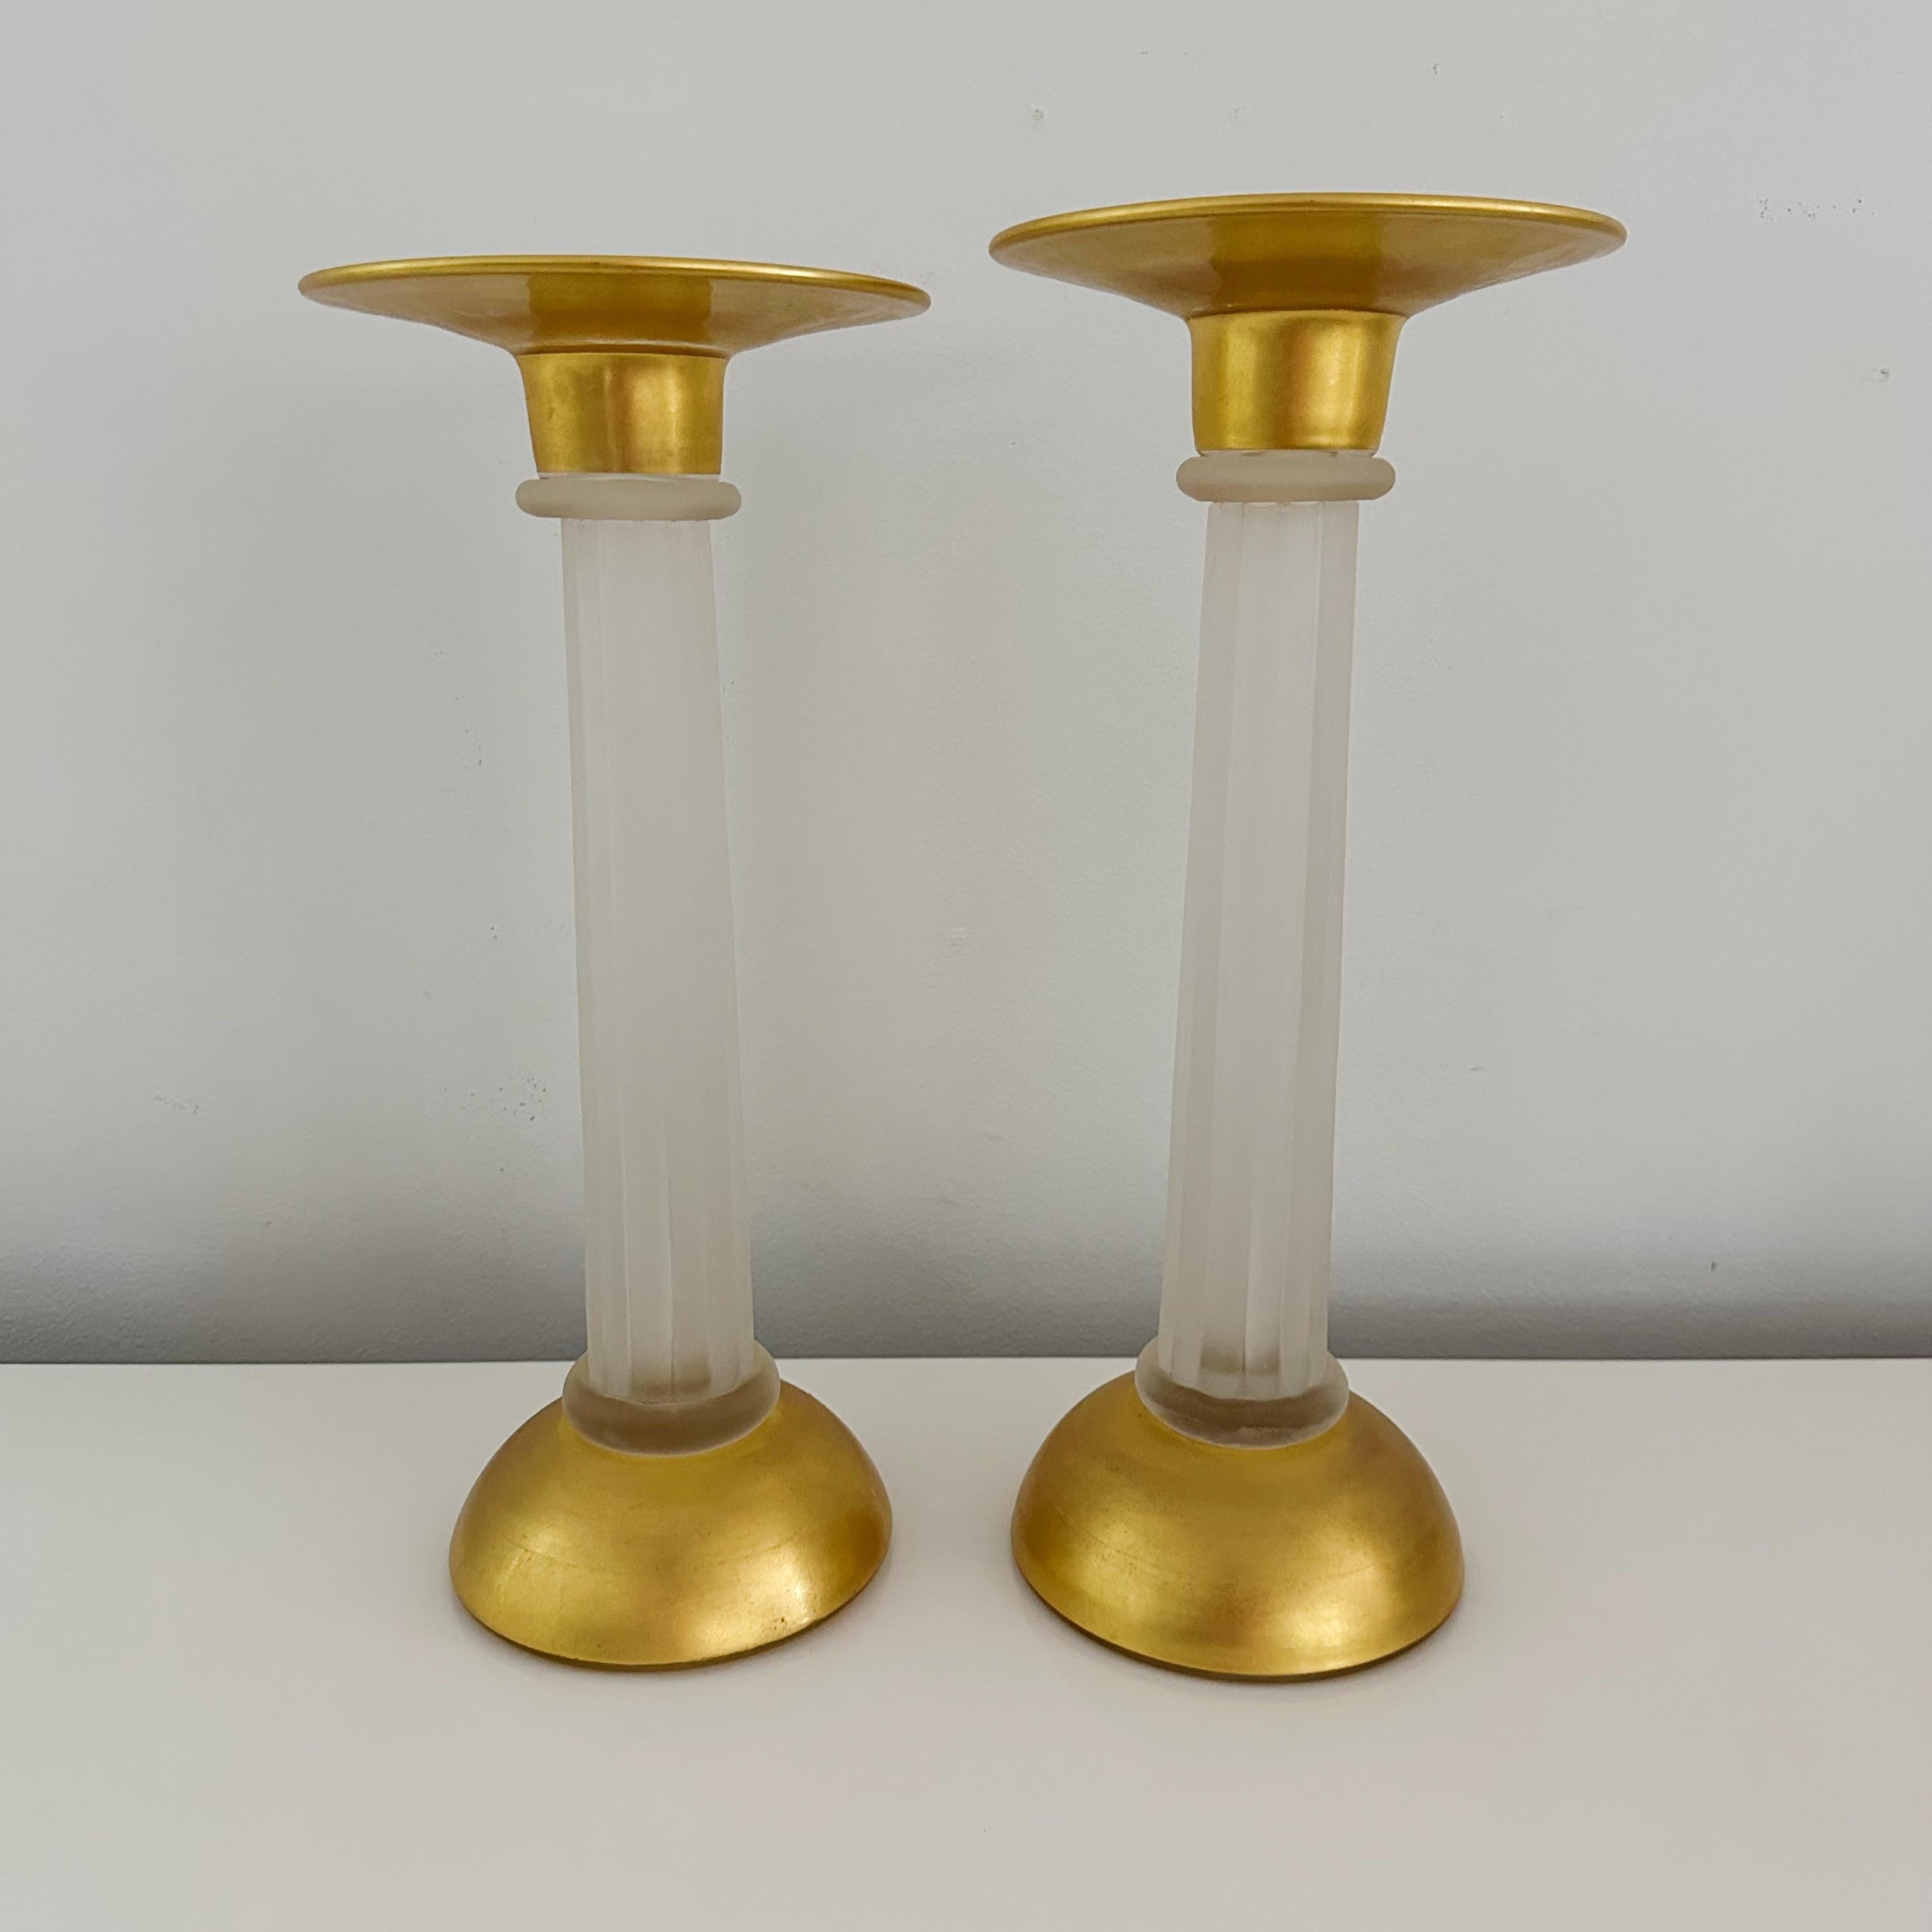 This pair of Murano glass candle holders features translucent fluted stems with exquisite gold leaf tops and bottoms. Each piece is signed on the base with the distinguished name 